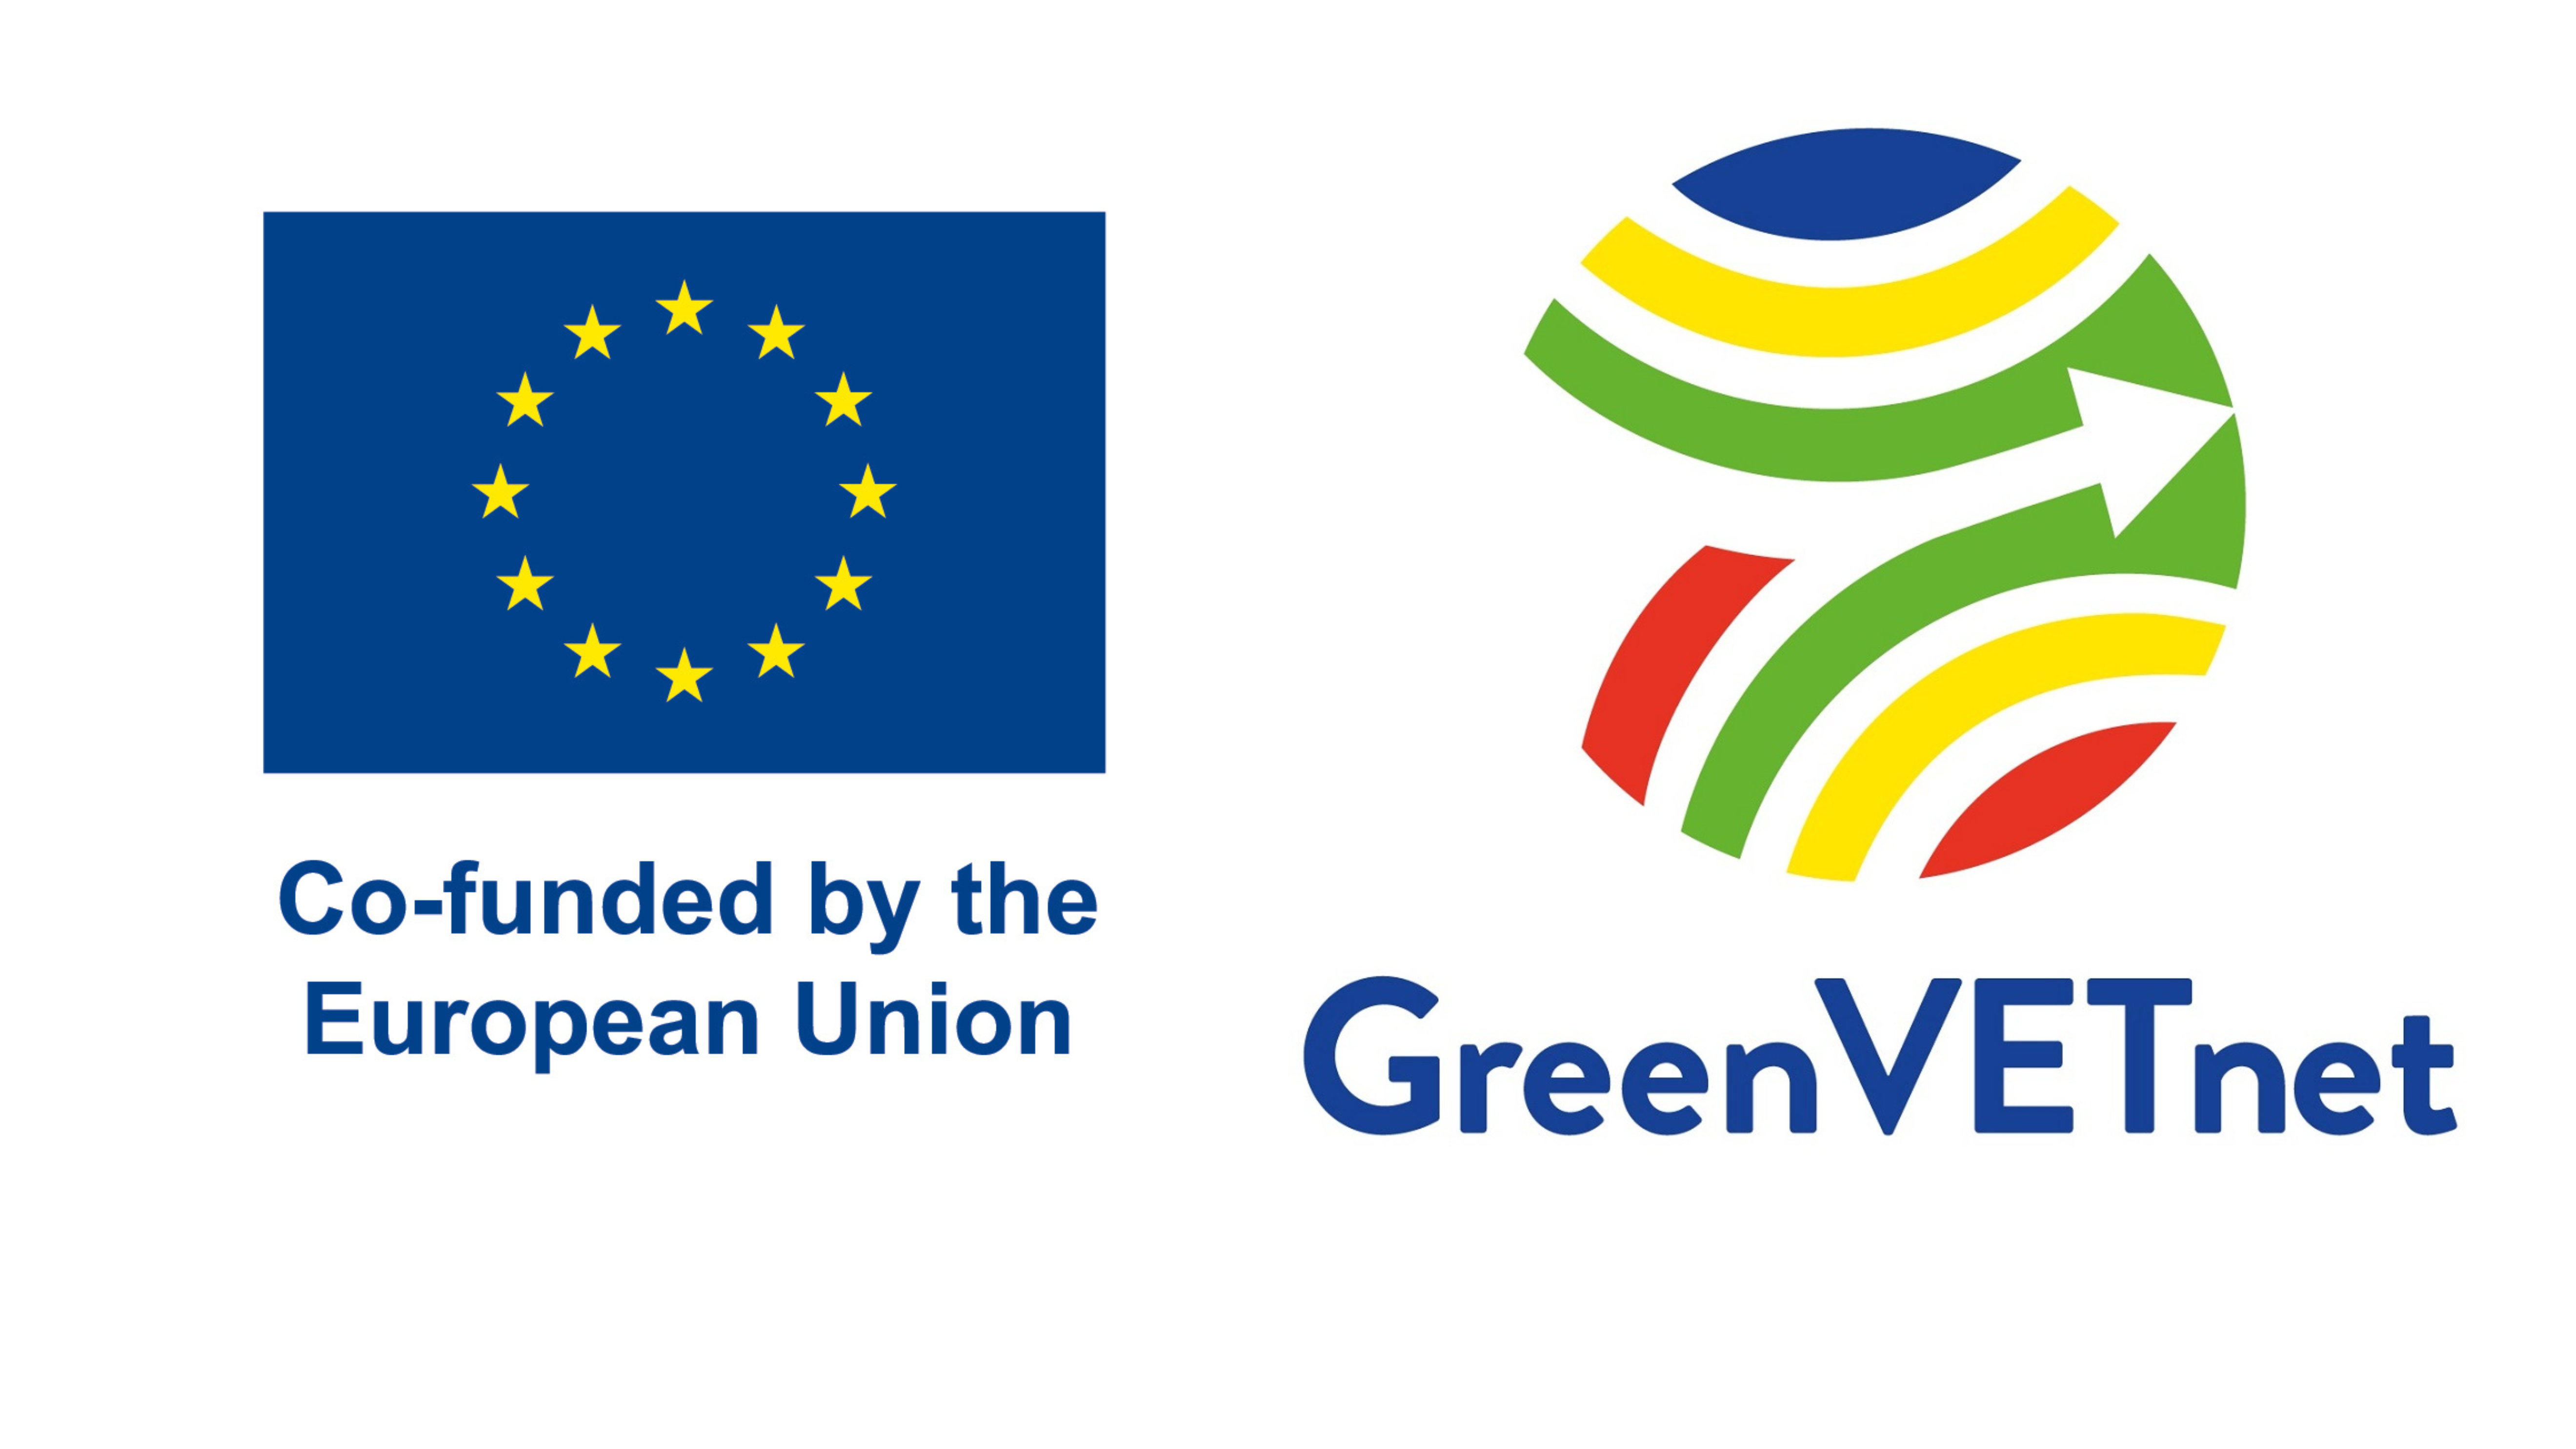 Logos co-funded with EU and GreenVETnet